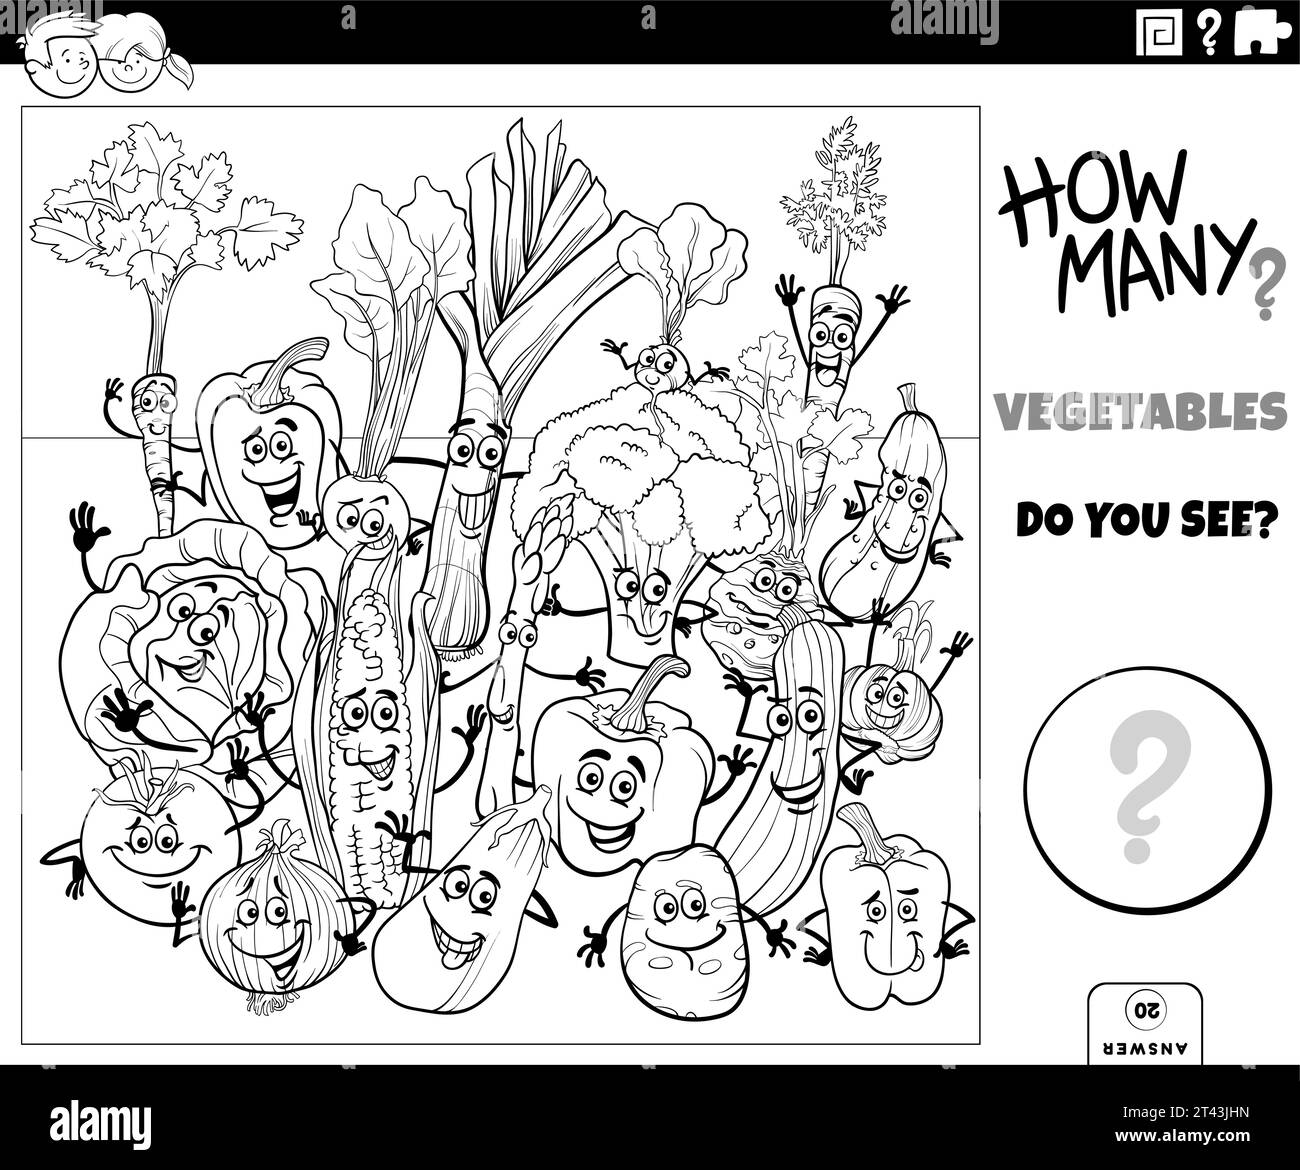 Black and white illustration of educational counting activity with cartoon vegetables characters coloring page Stock Vector